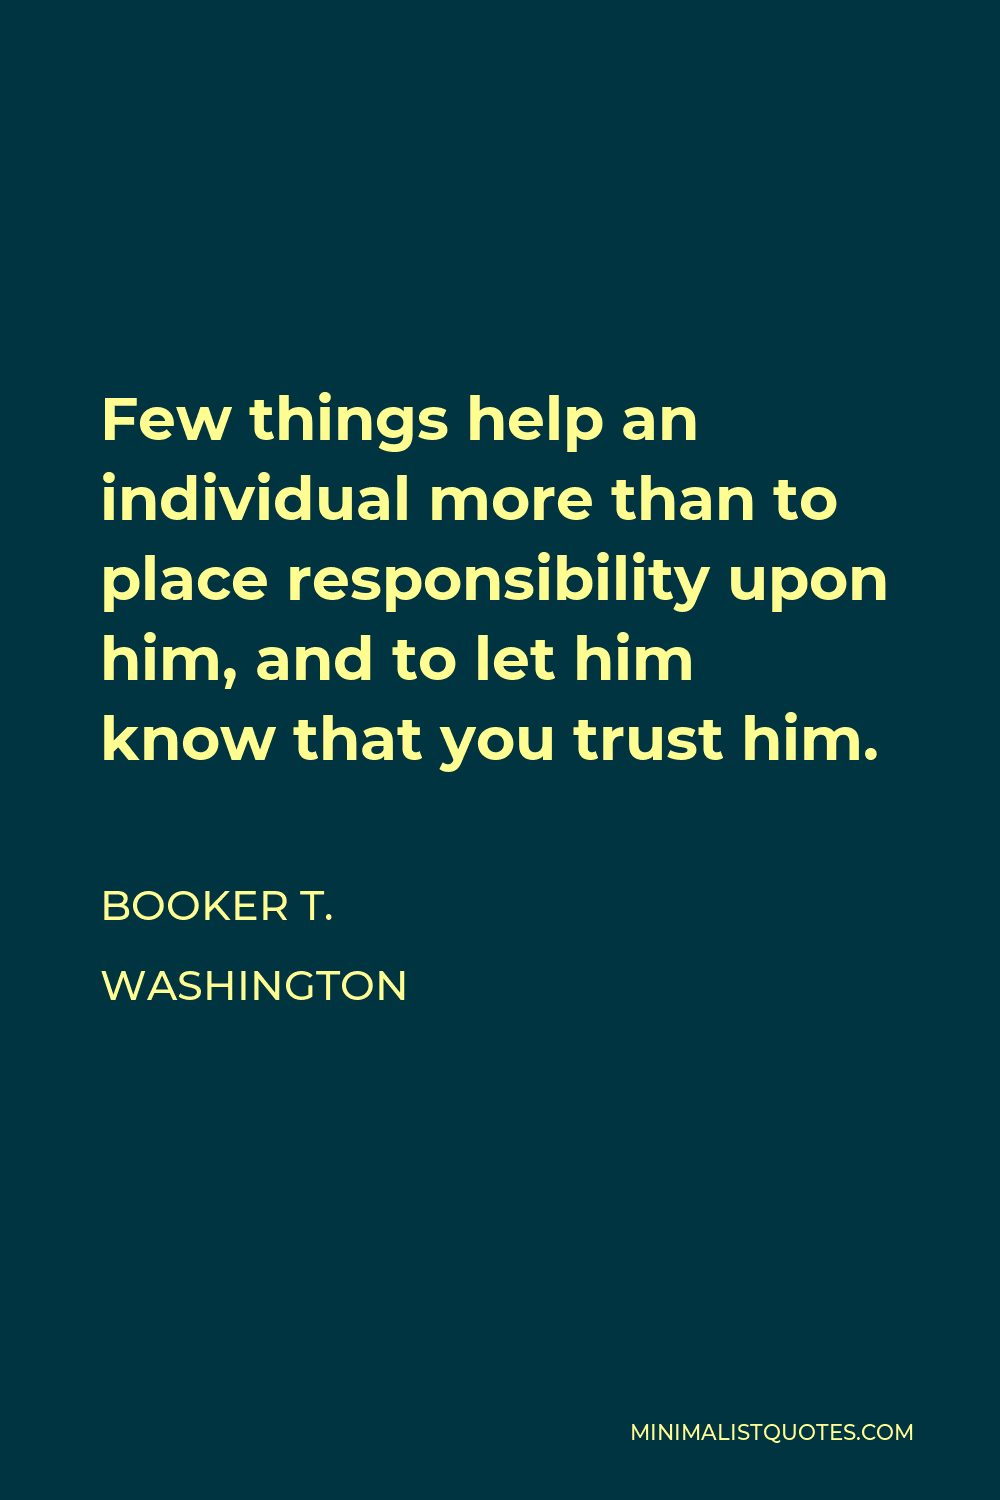 Booker T. Washington Quote - Few things help an individual more than to place responsibility upon him, and to let him know that you trust him.